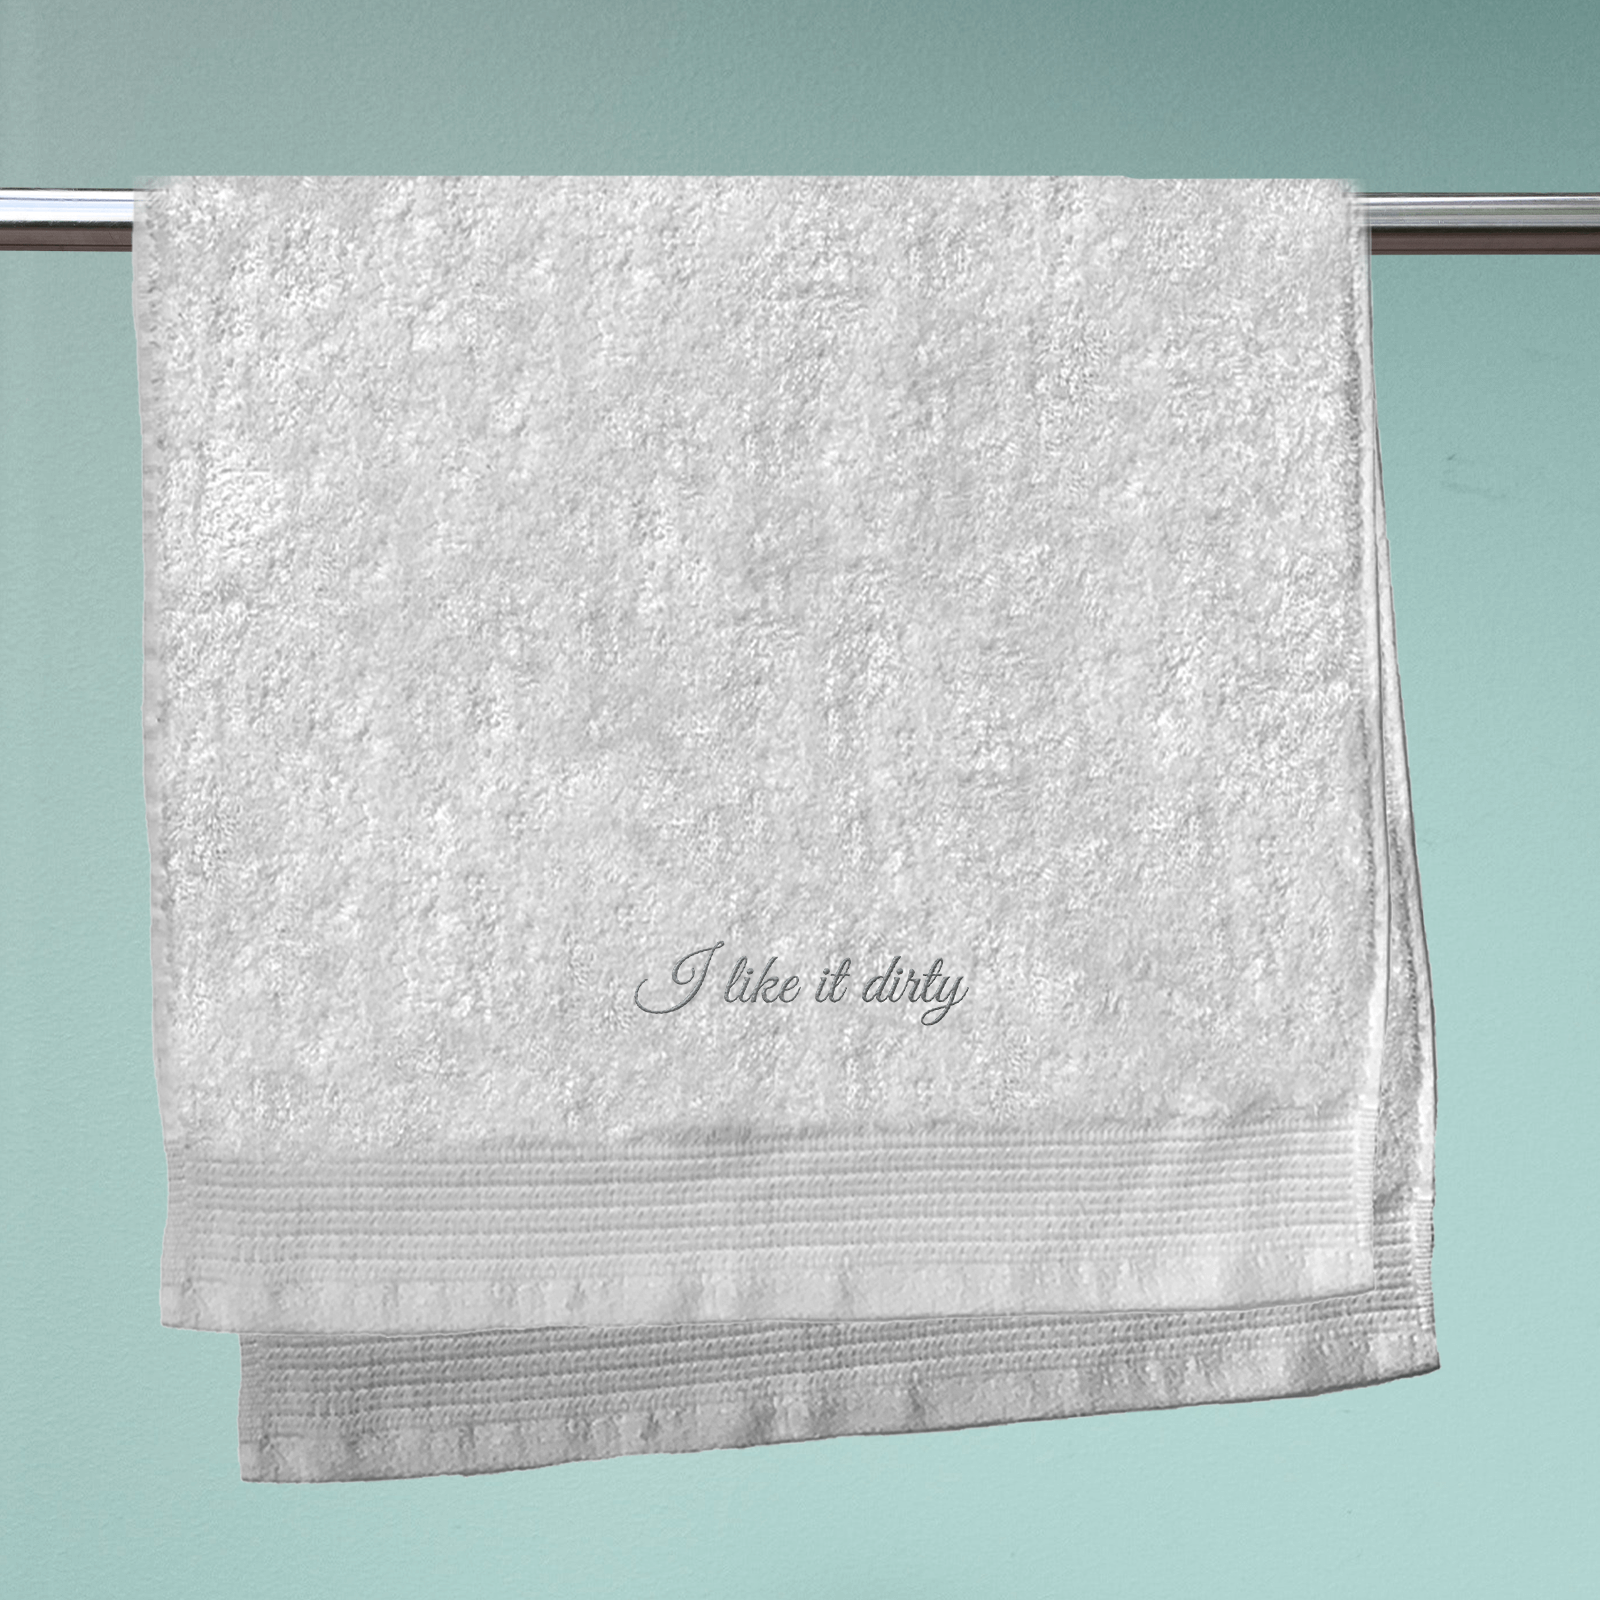 I Like It Dirty Embroidered Hand Towel